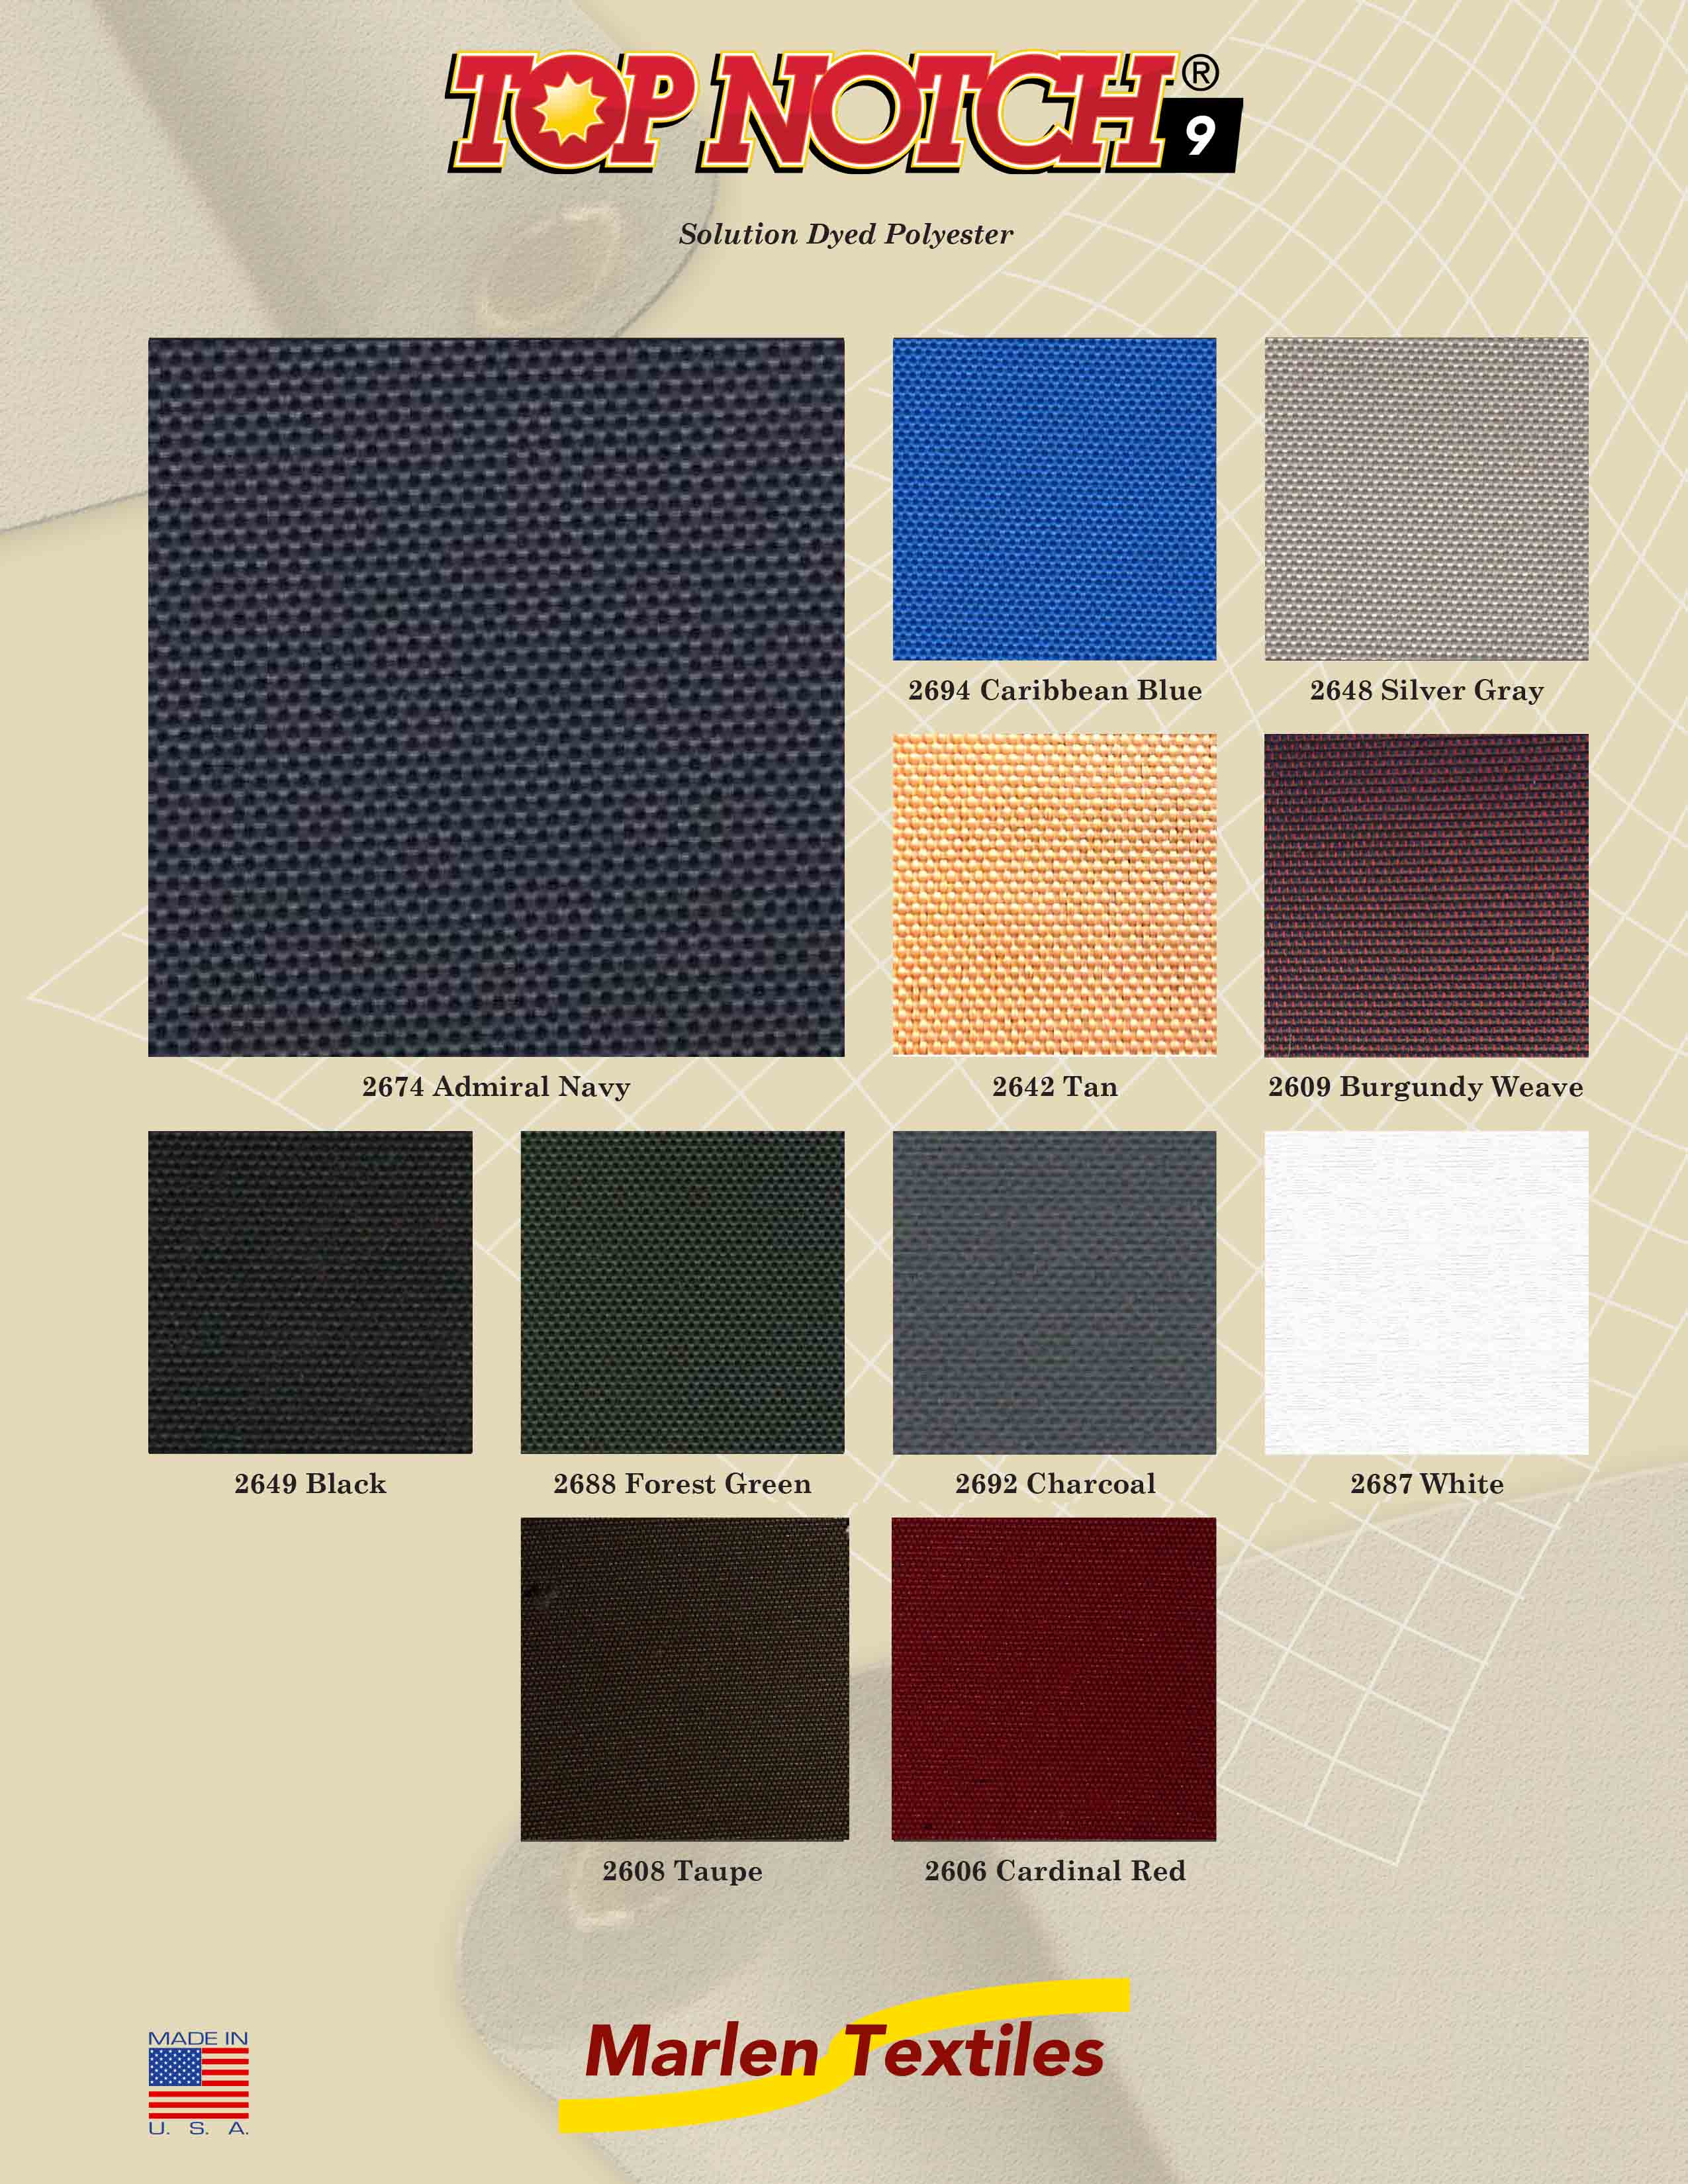 Marlen Textiles | Top Notch 9 Solution Dyed Polyester Colors
